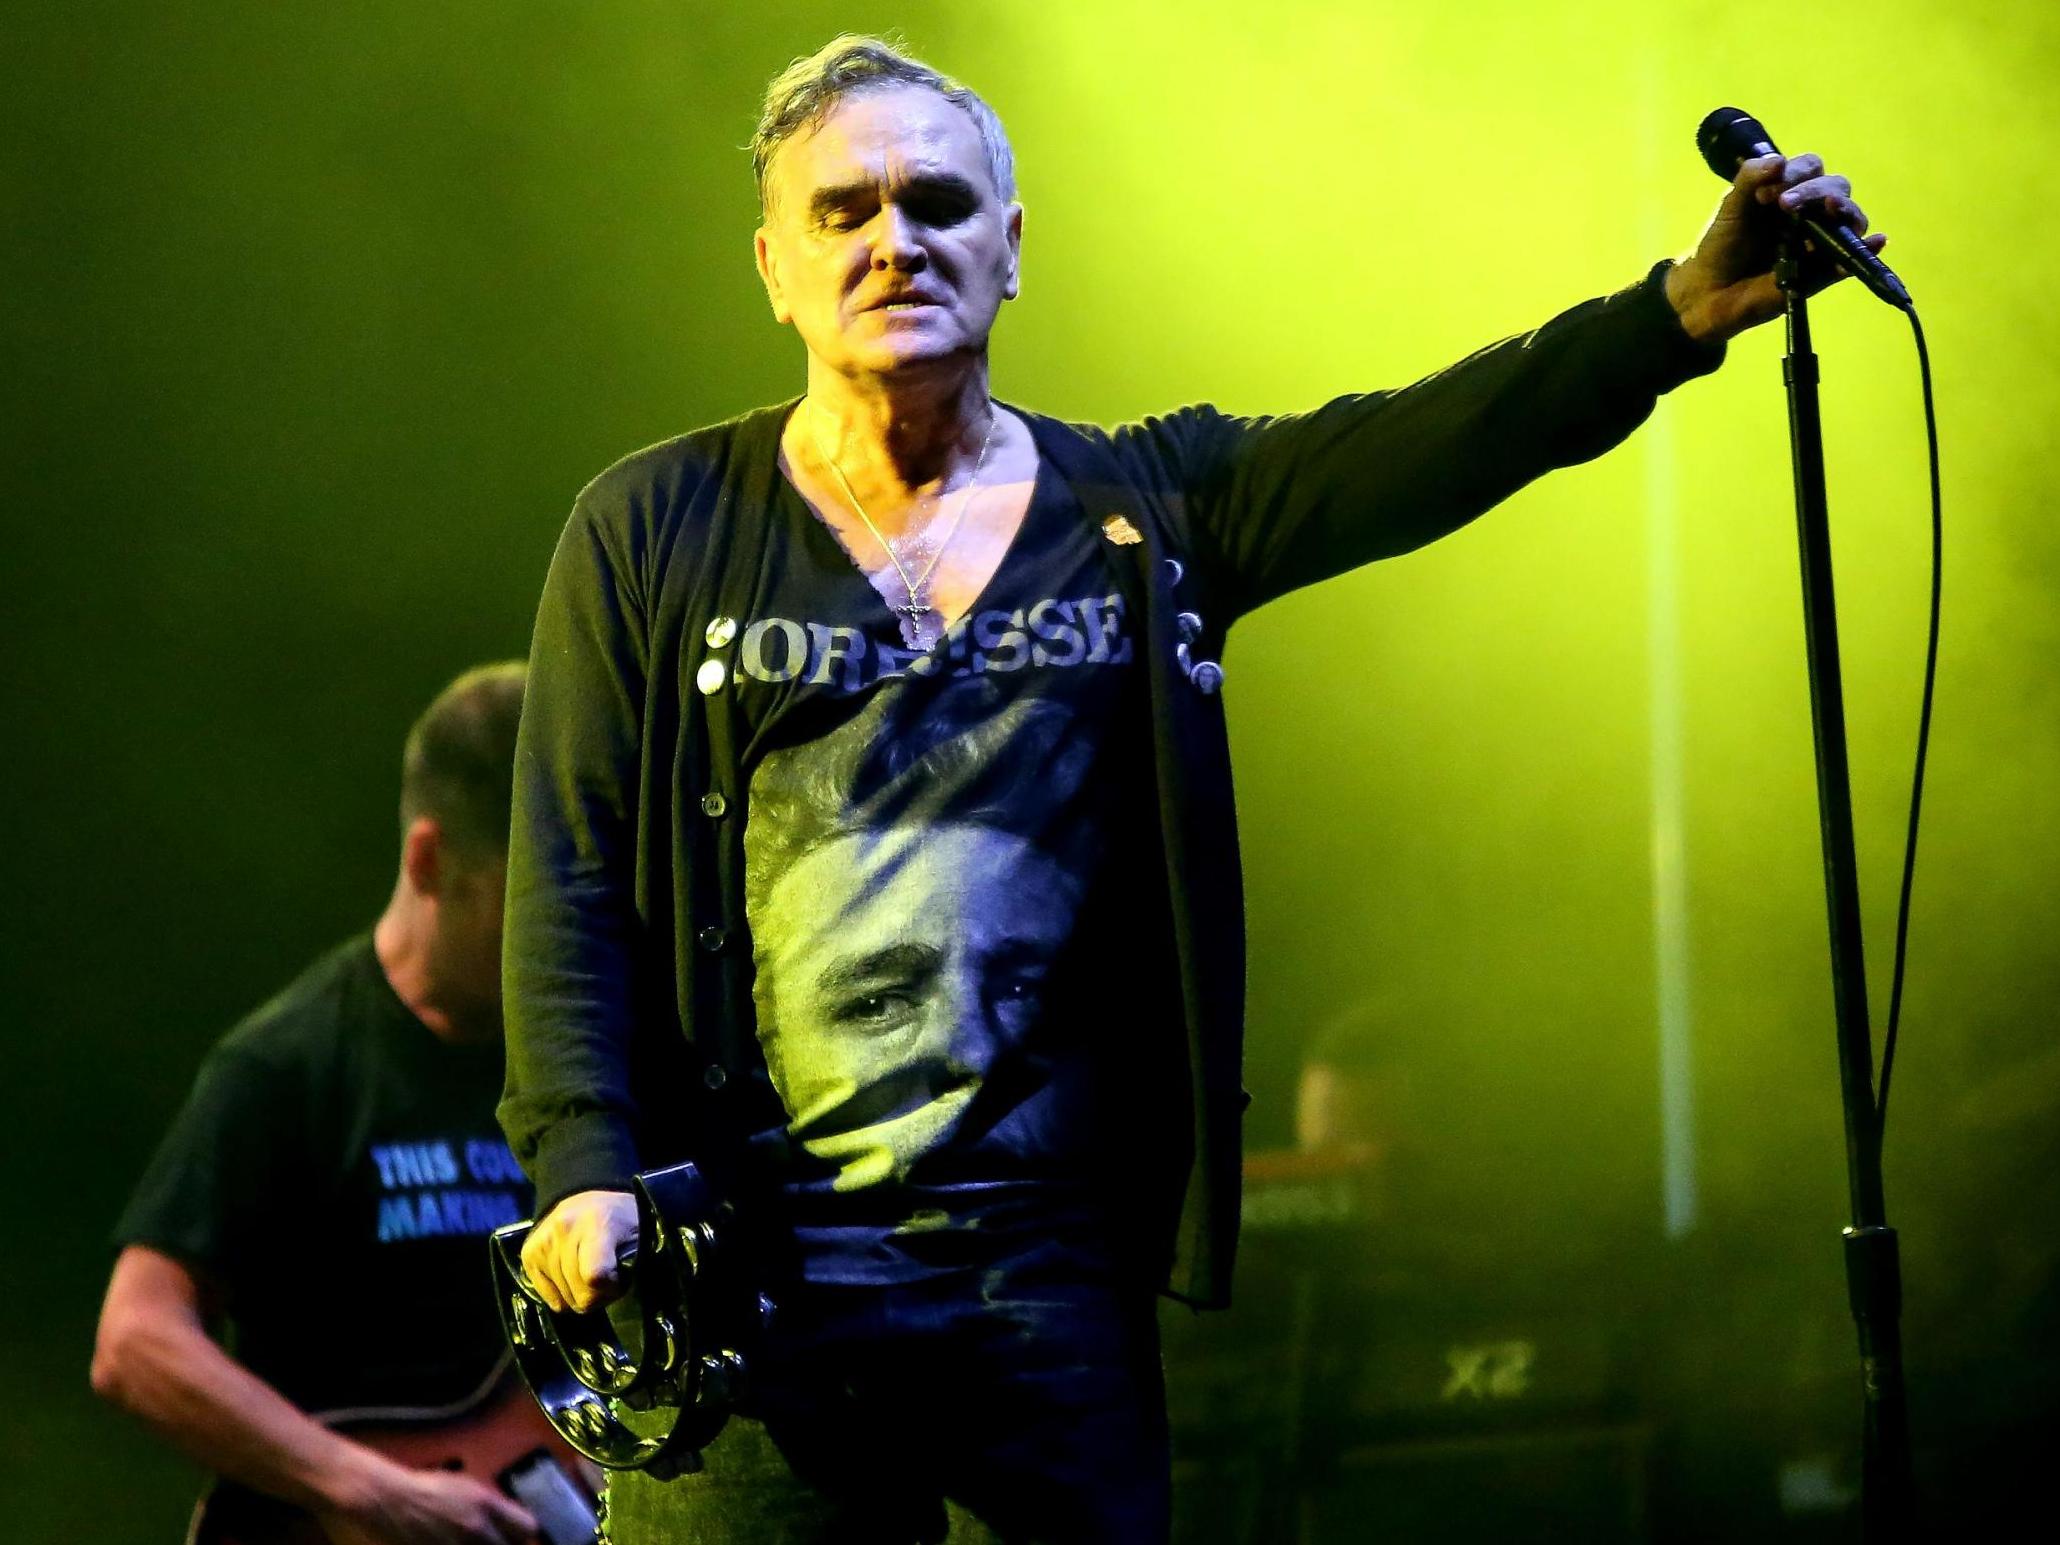 This harming man: Morrissey retains a large audience in America, a hardcore of fans who are either unaware or unfazed by his awful bigotry